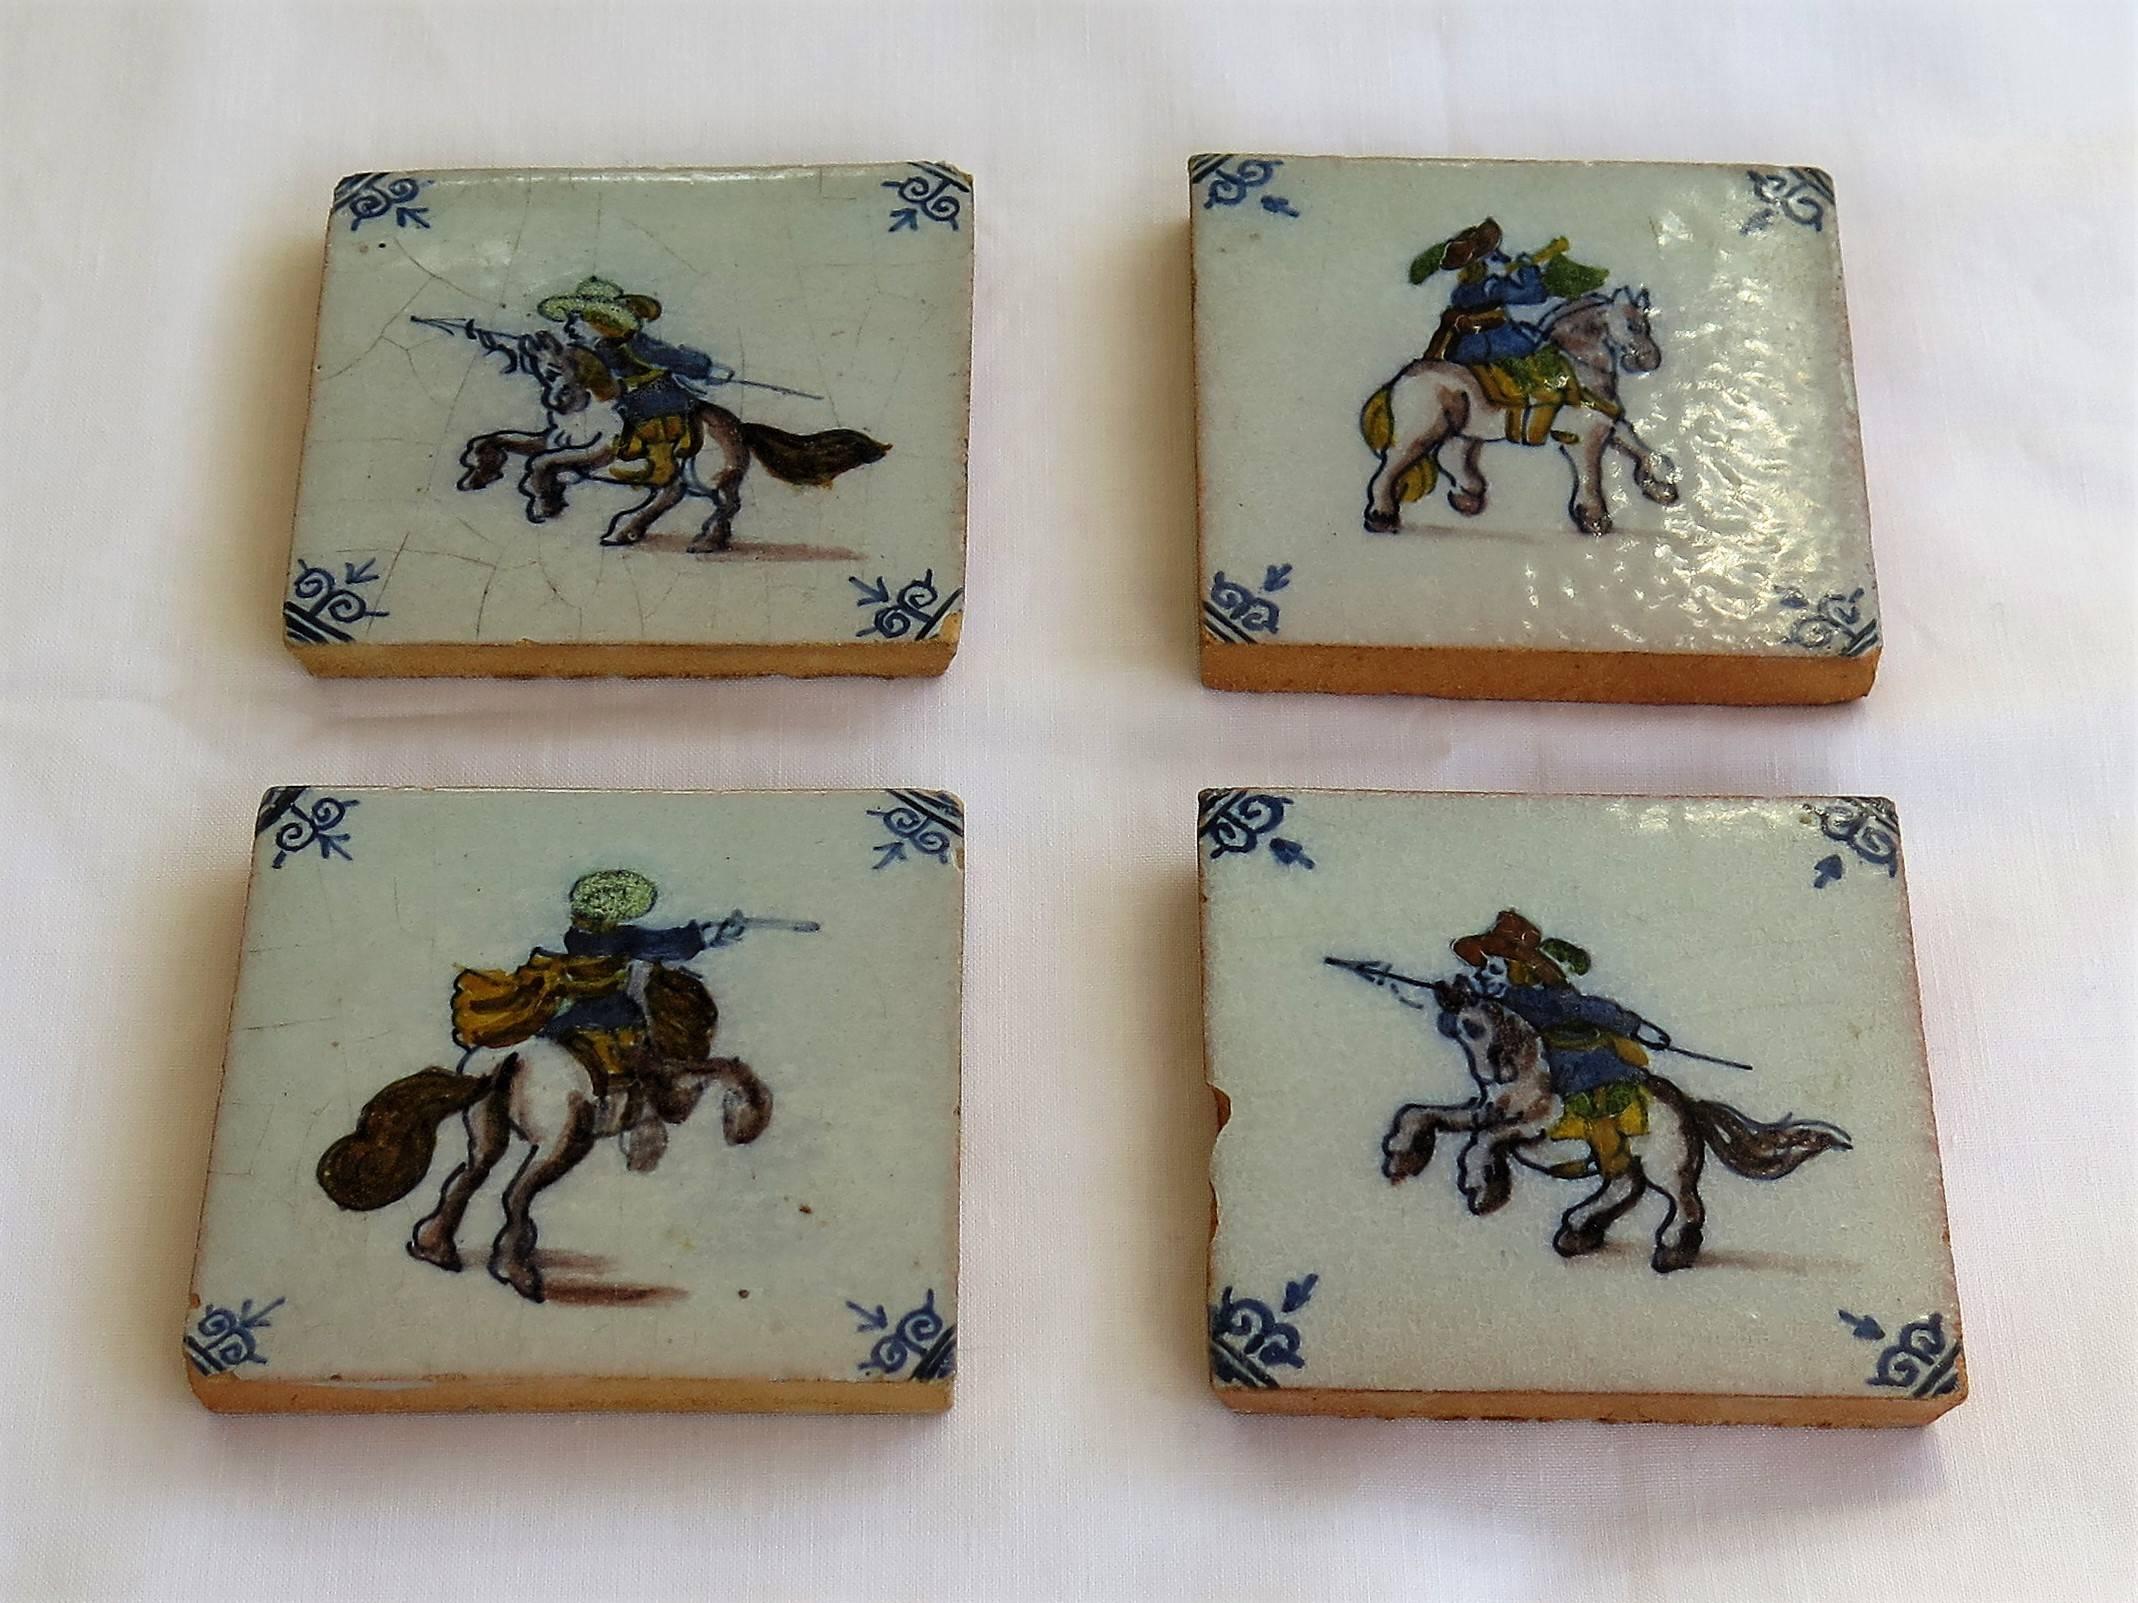 These are a very decorative set of 4 small ceramic wall tiles, with a military horse riding theme, dating to the later part of the 18th century or early in the 19th Century.

All four tiles are nominally 3 inches square and 3/8 inch thick.

The